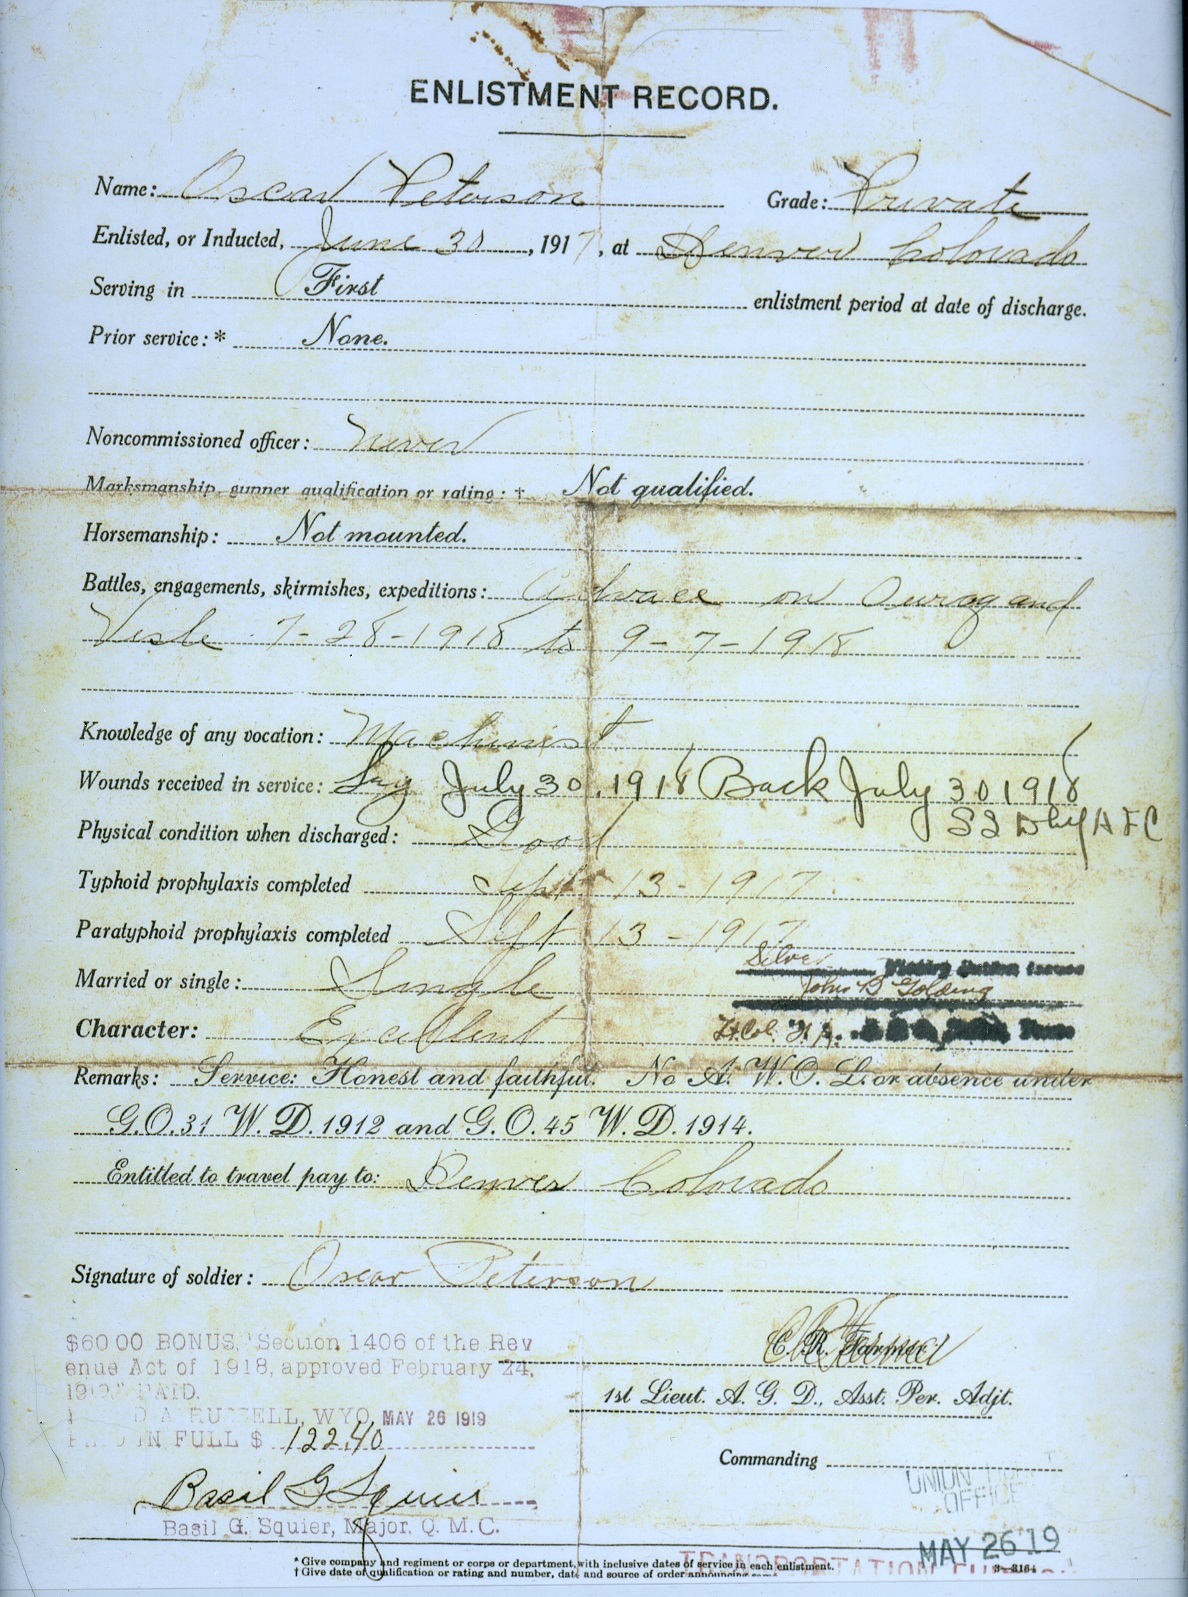 The enlistment record for Oscar Peterson